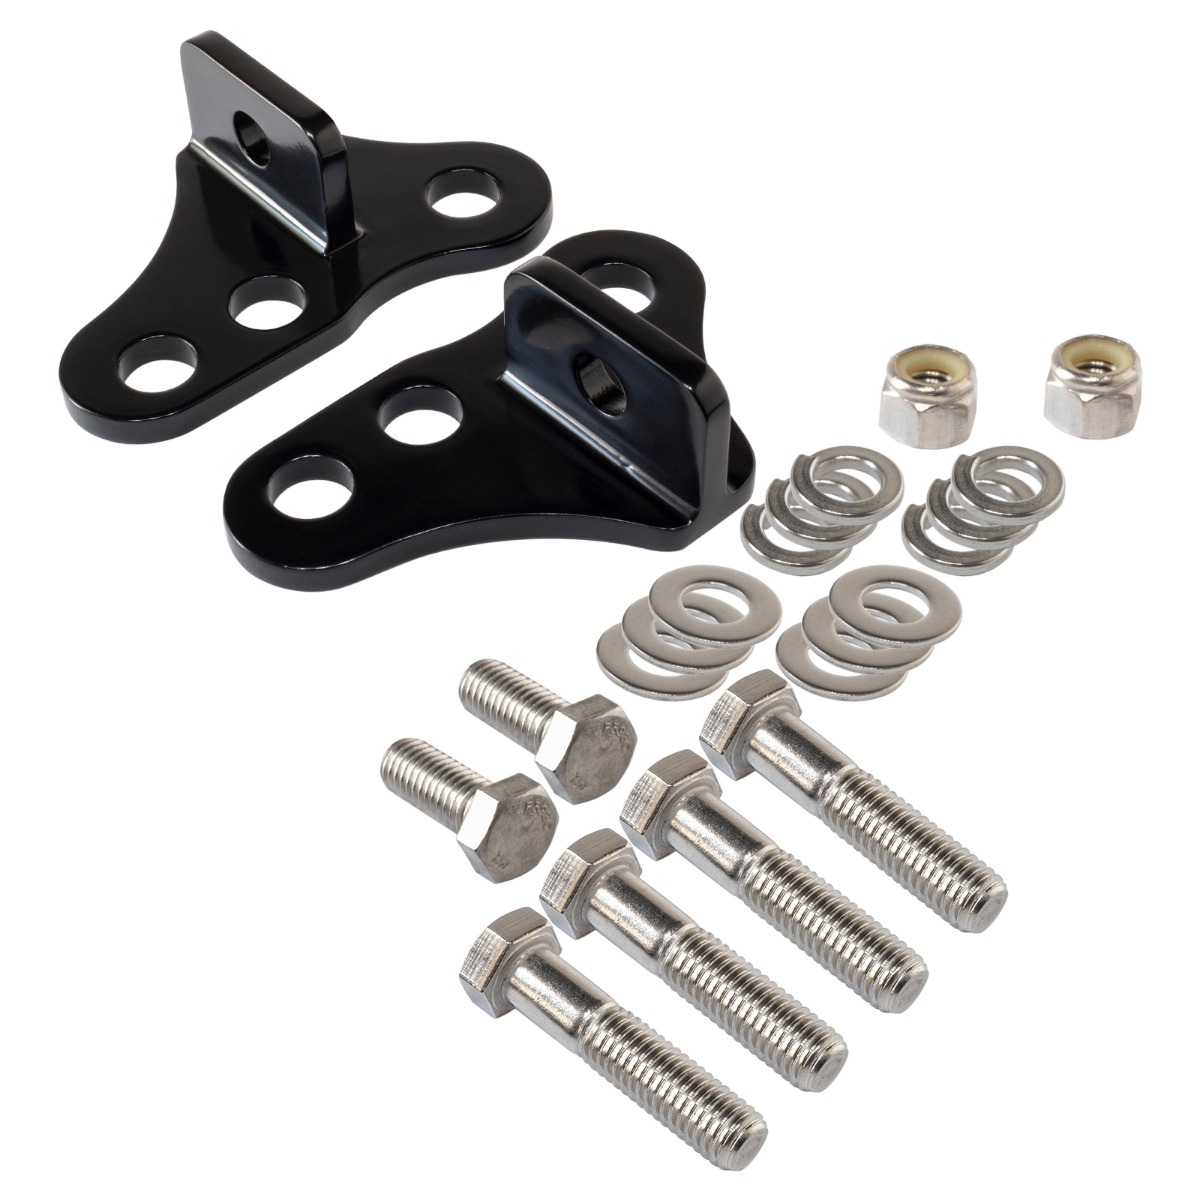 Adjustable Lower Drop Kit 1"-2" Lowering Fit For Harley Touring Road Glide 93-01